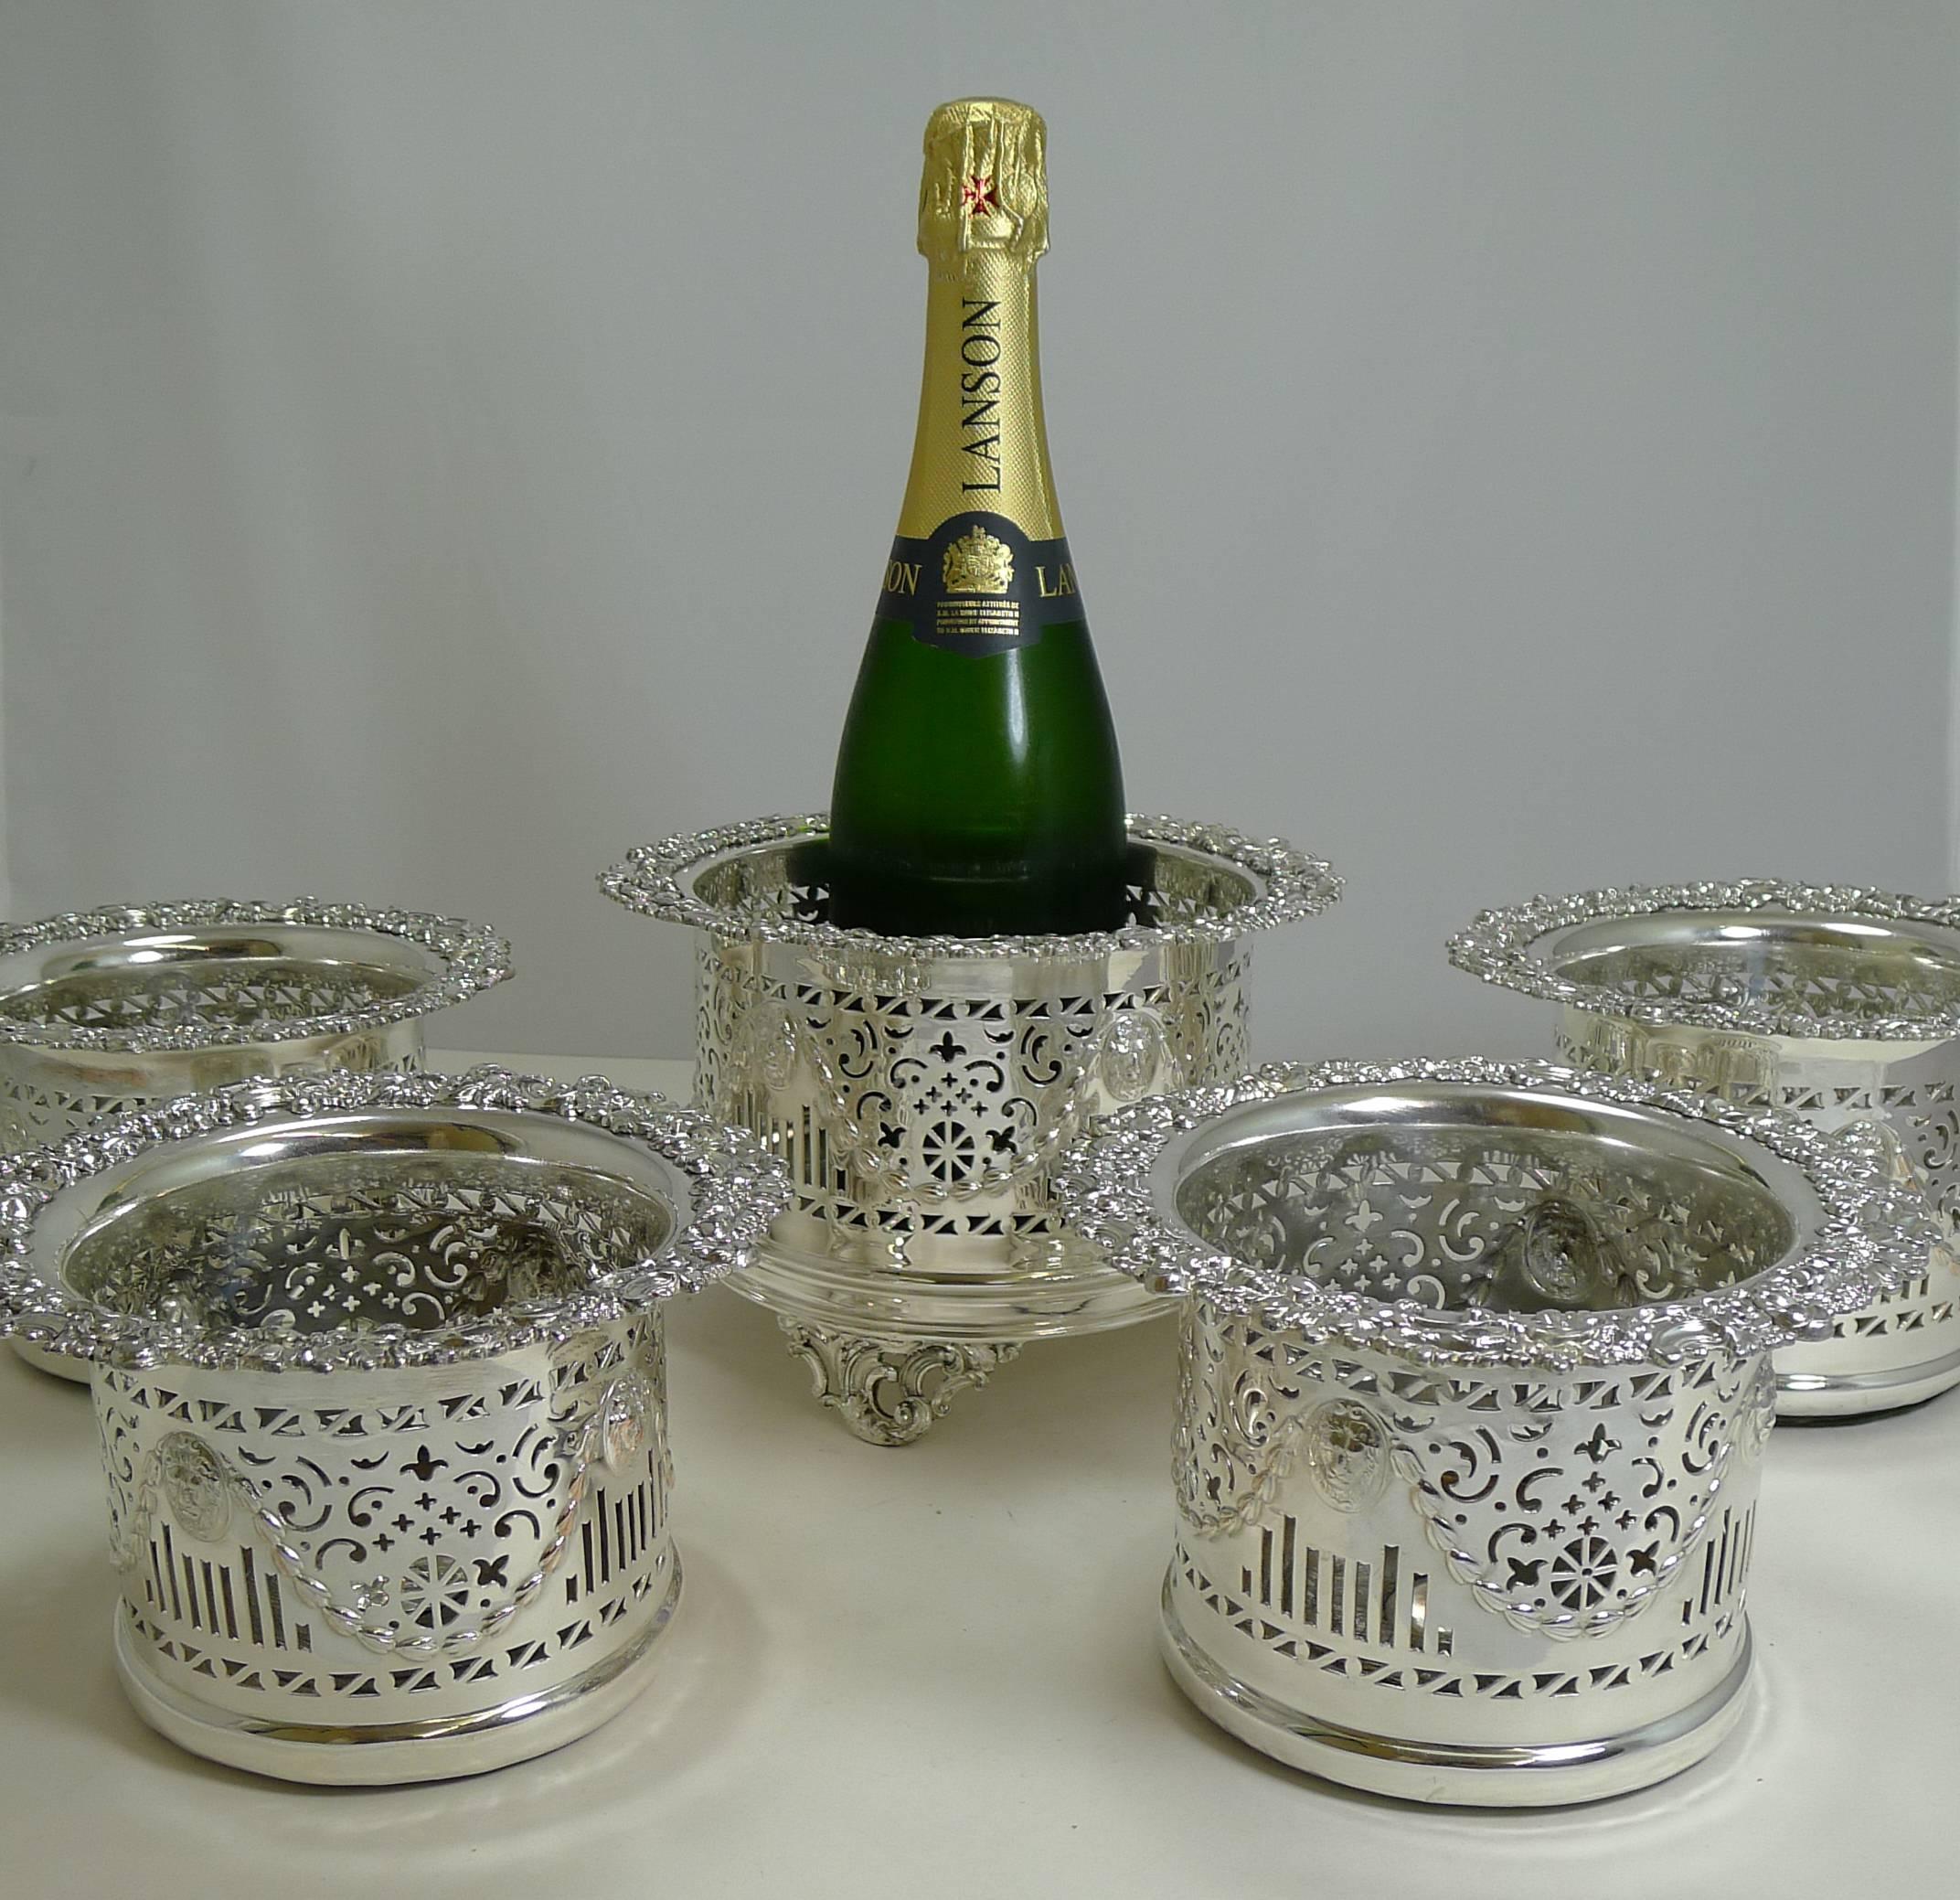 Suite Five Antique English Silver Plated Wine / Champagne Coasters or Holders C 3